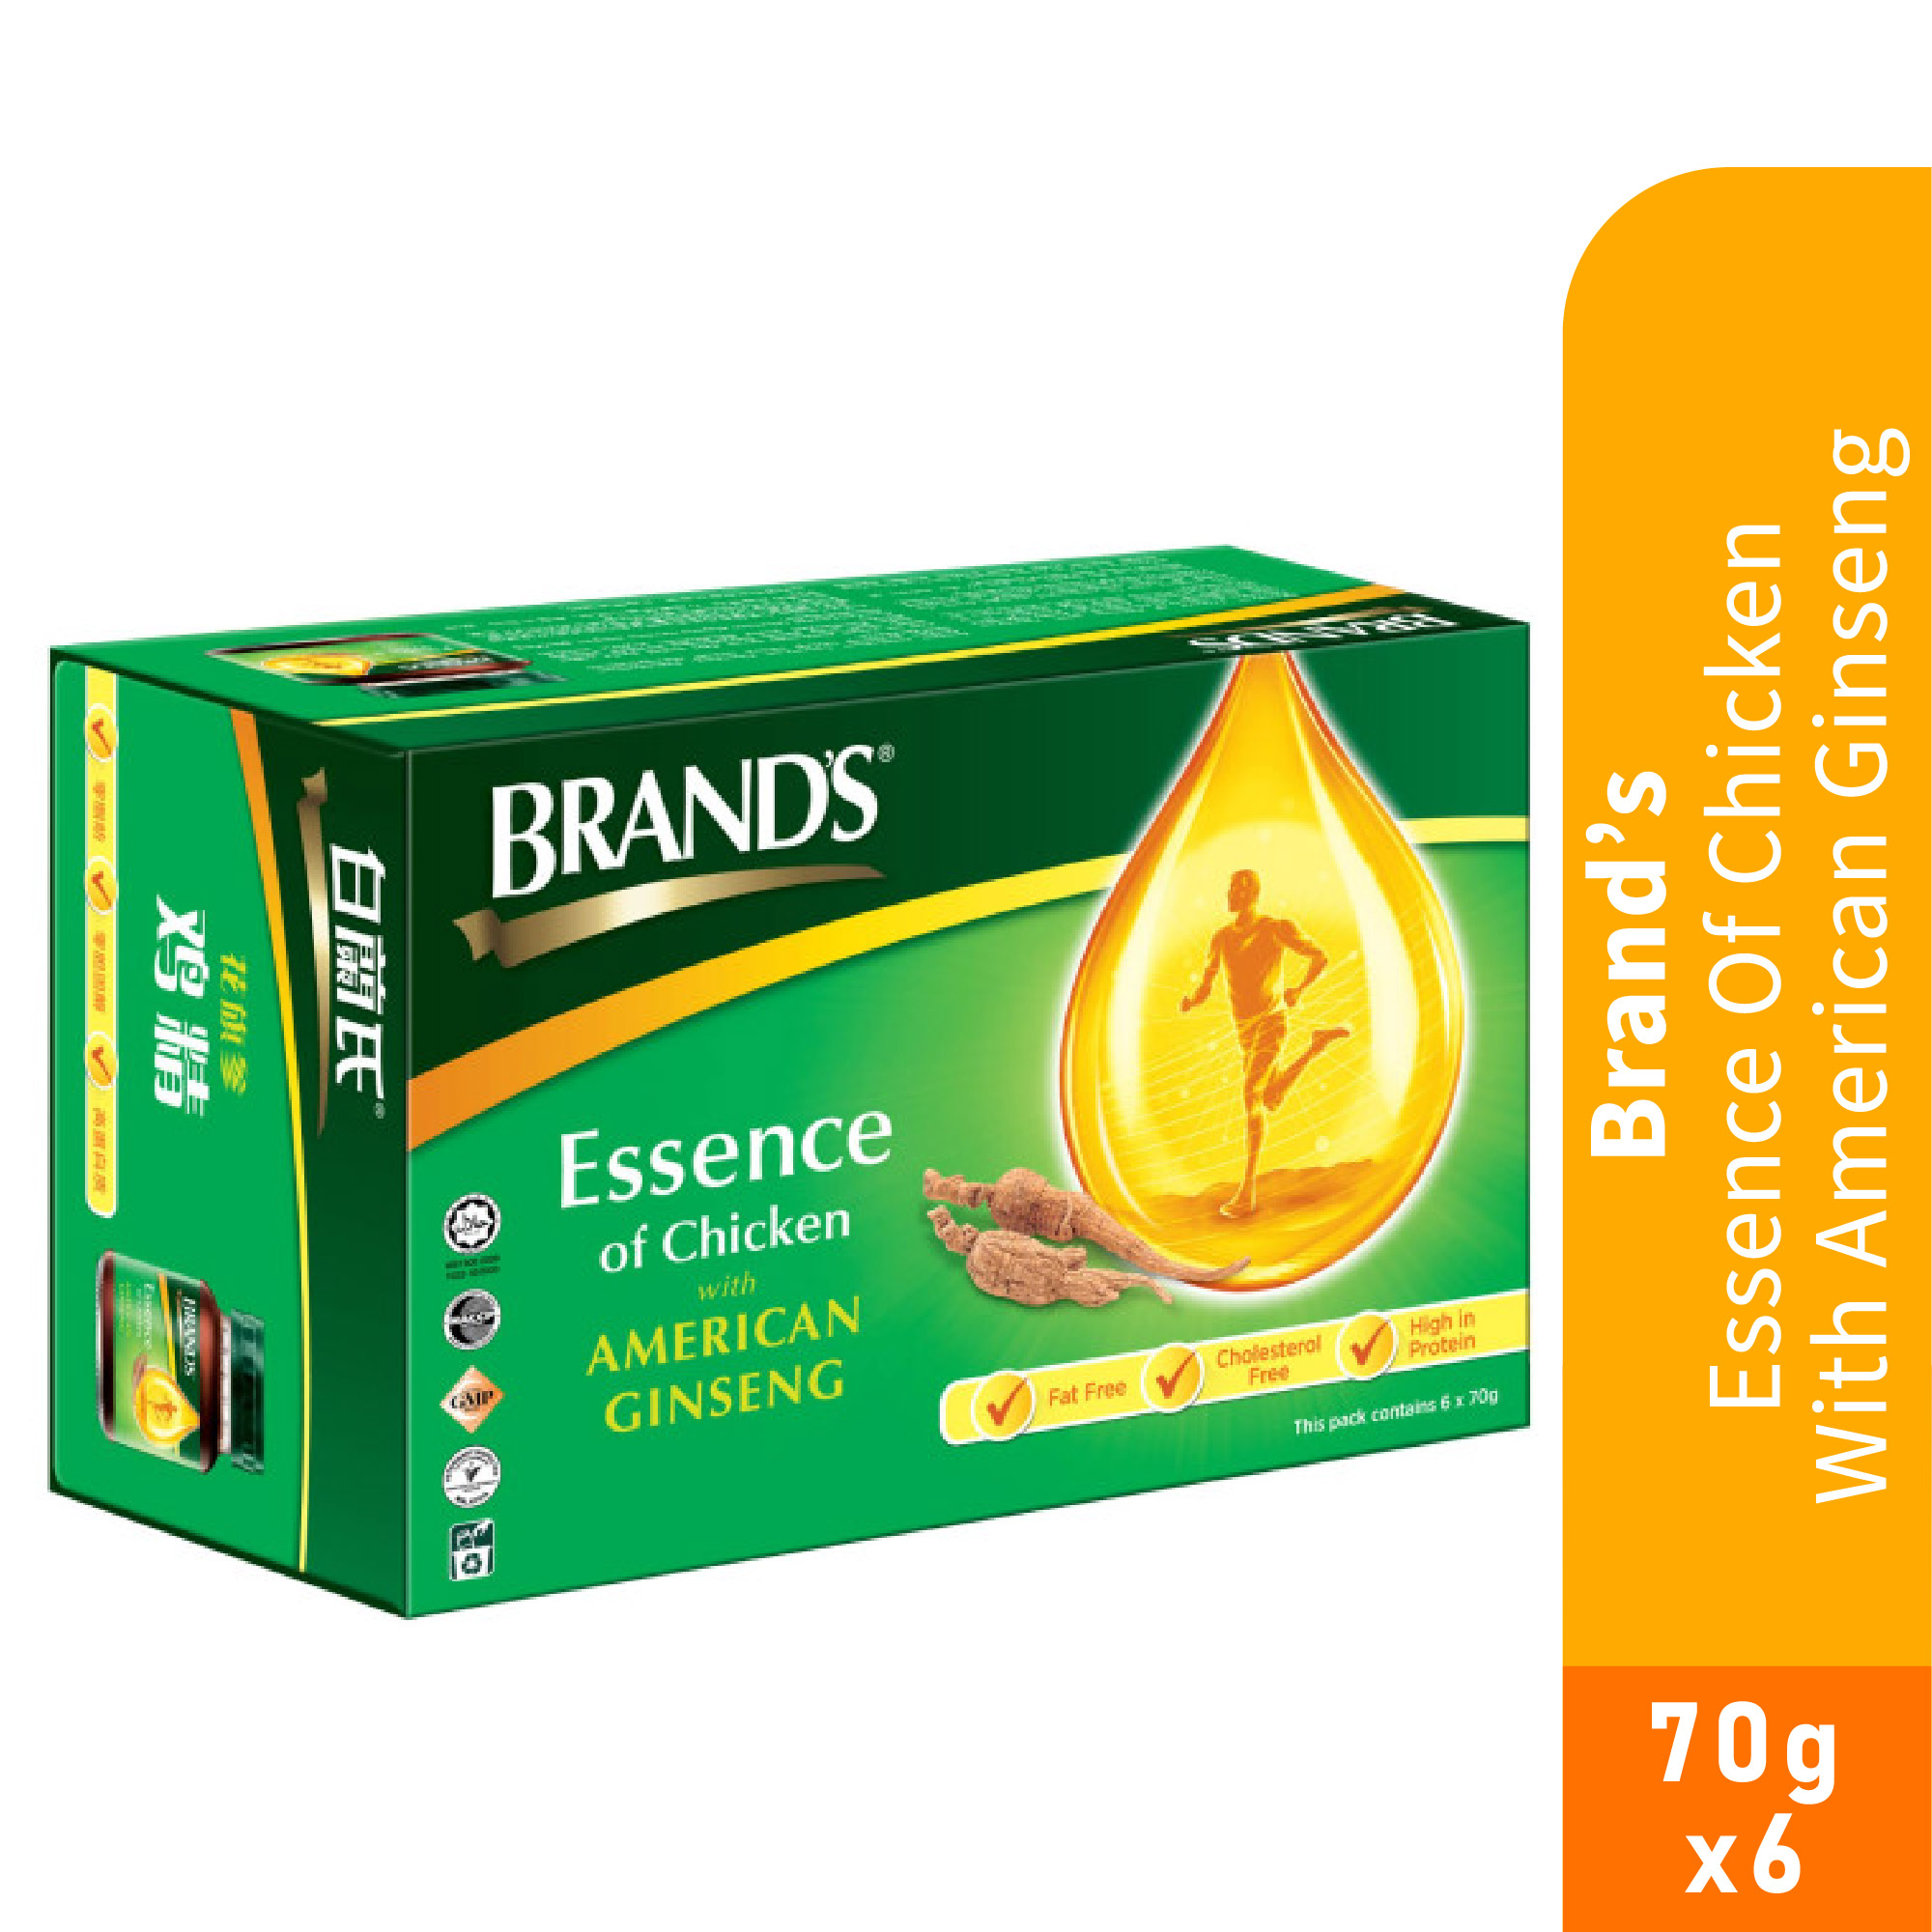 BRANDS Essence of Chicken with American Ginseng 70g X 6's with High Protein Chicken Essence for Memory, Immune & Energy